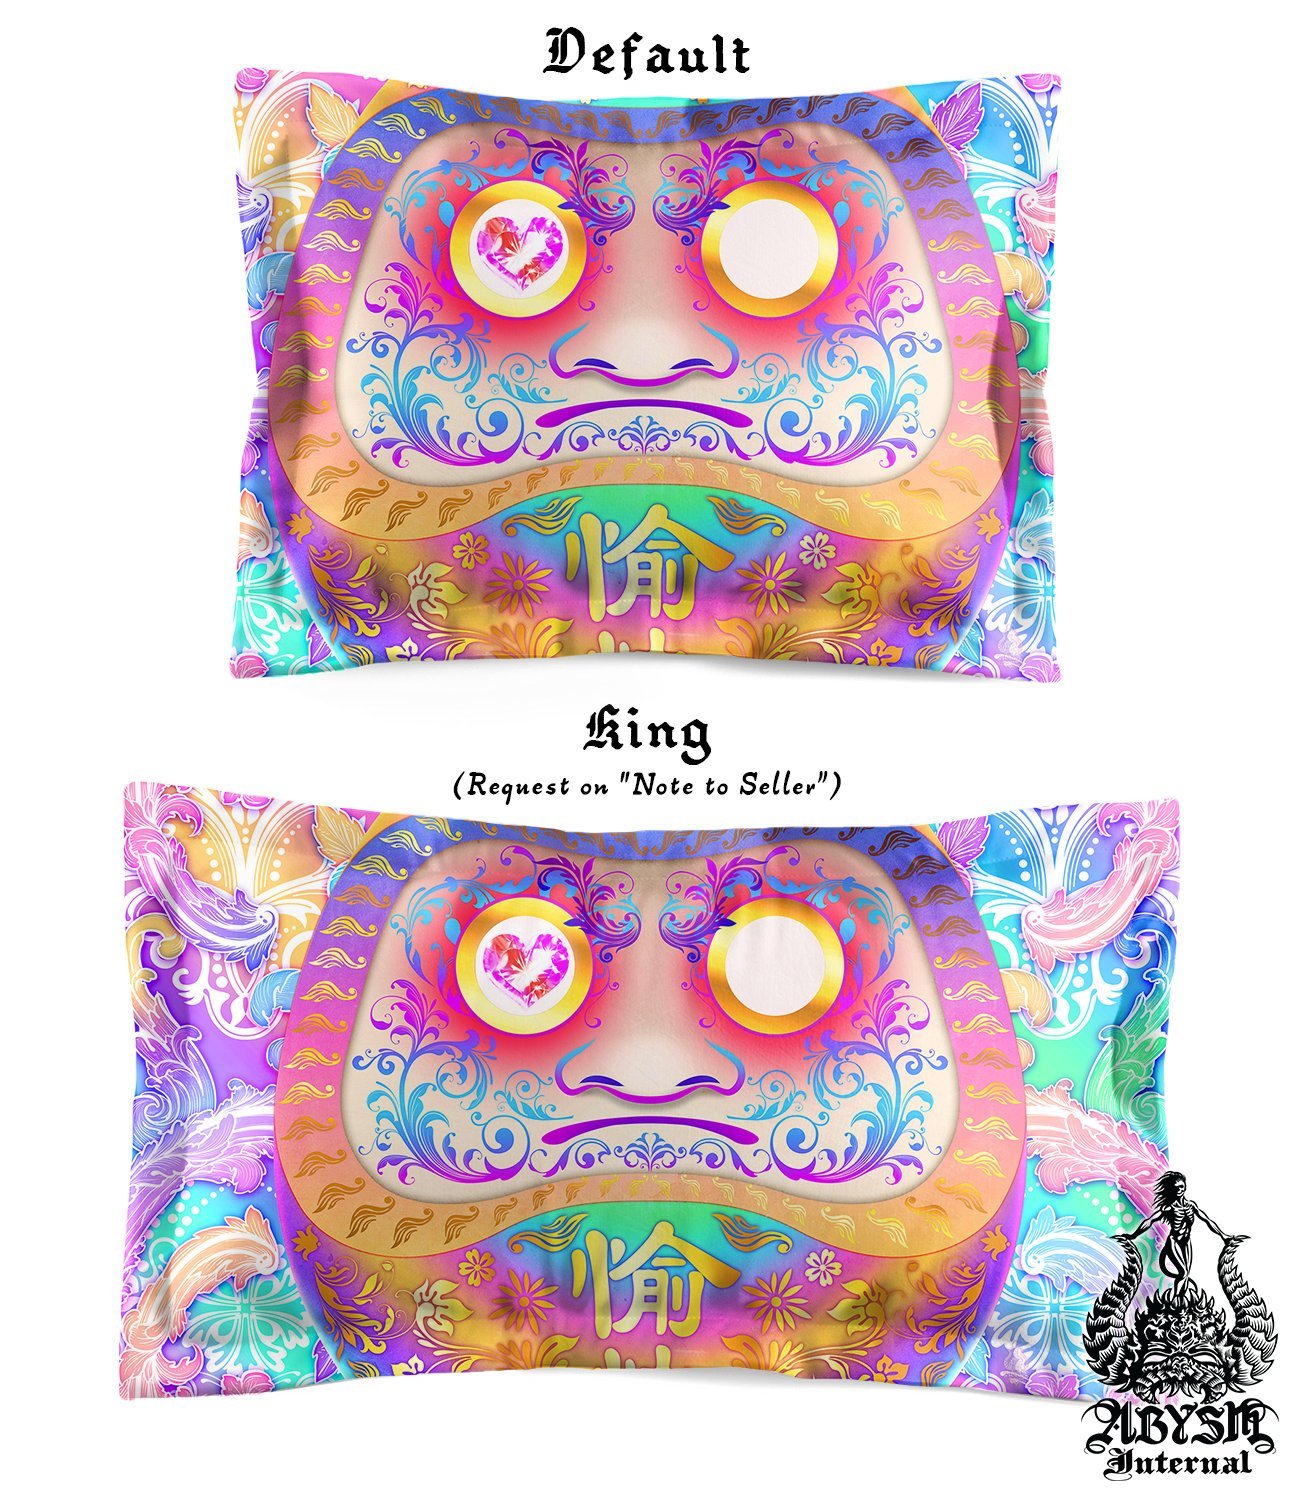 Holographic Bedding Set, Comforter and Duvet, Pastel Daruma, Aesthetic Bed Cover, Kawaii Bedroom Decor, Indie, King, Queen and Twin Size - Psychedelic, Fairy Kei - Abysm Internal